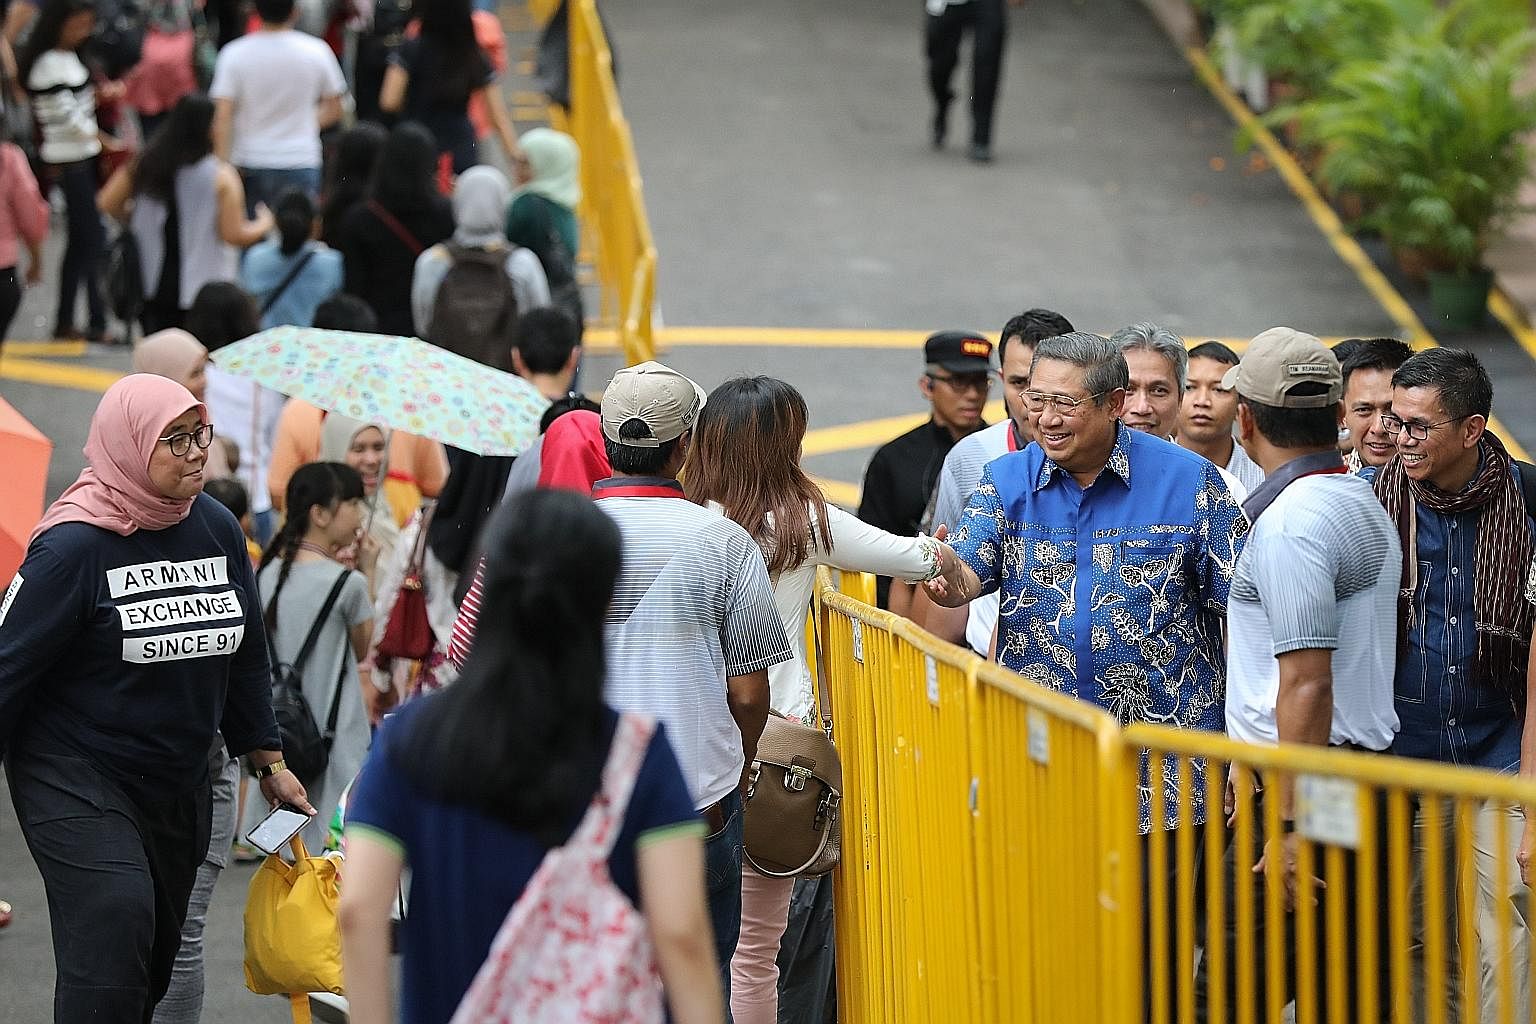 Former Indonesian president Susilo Bambang Yudhoyono arriving at Singapore's Indonesian embassy yesterday for early voting. He stole the limelight when he turned up in the evening, drawing squeals and handshakes.